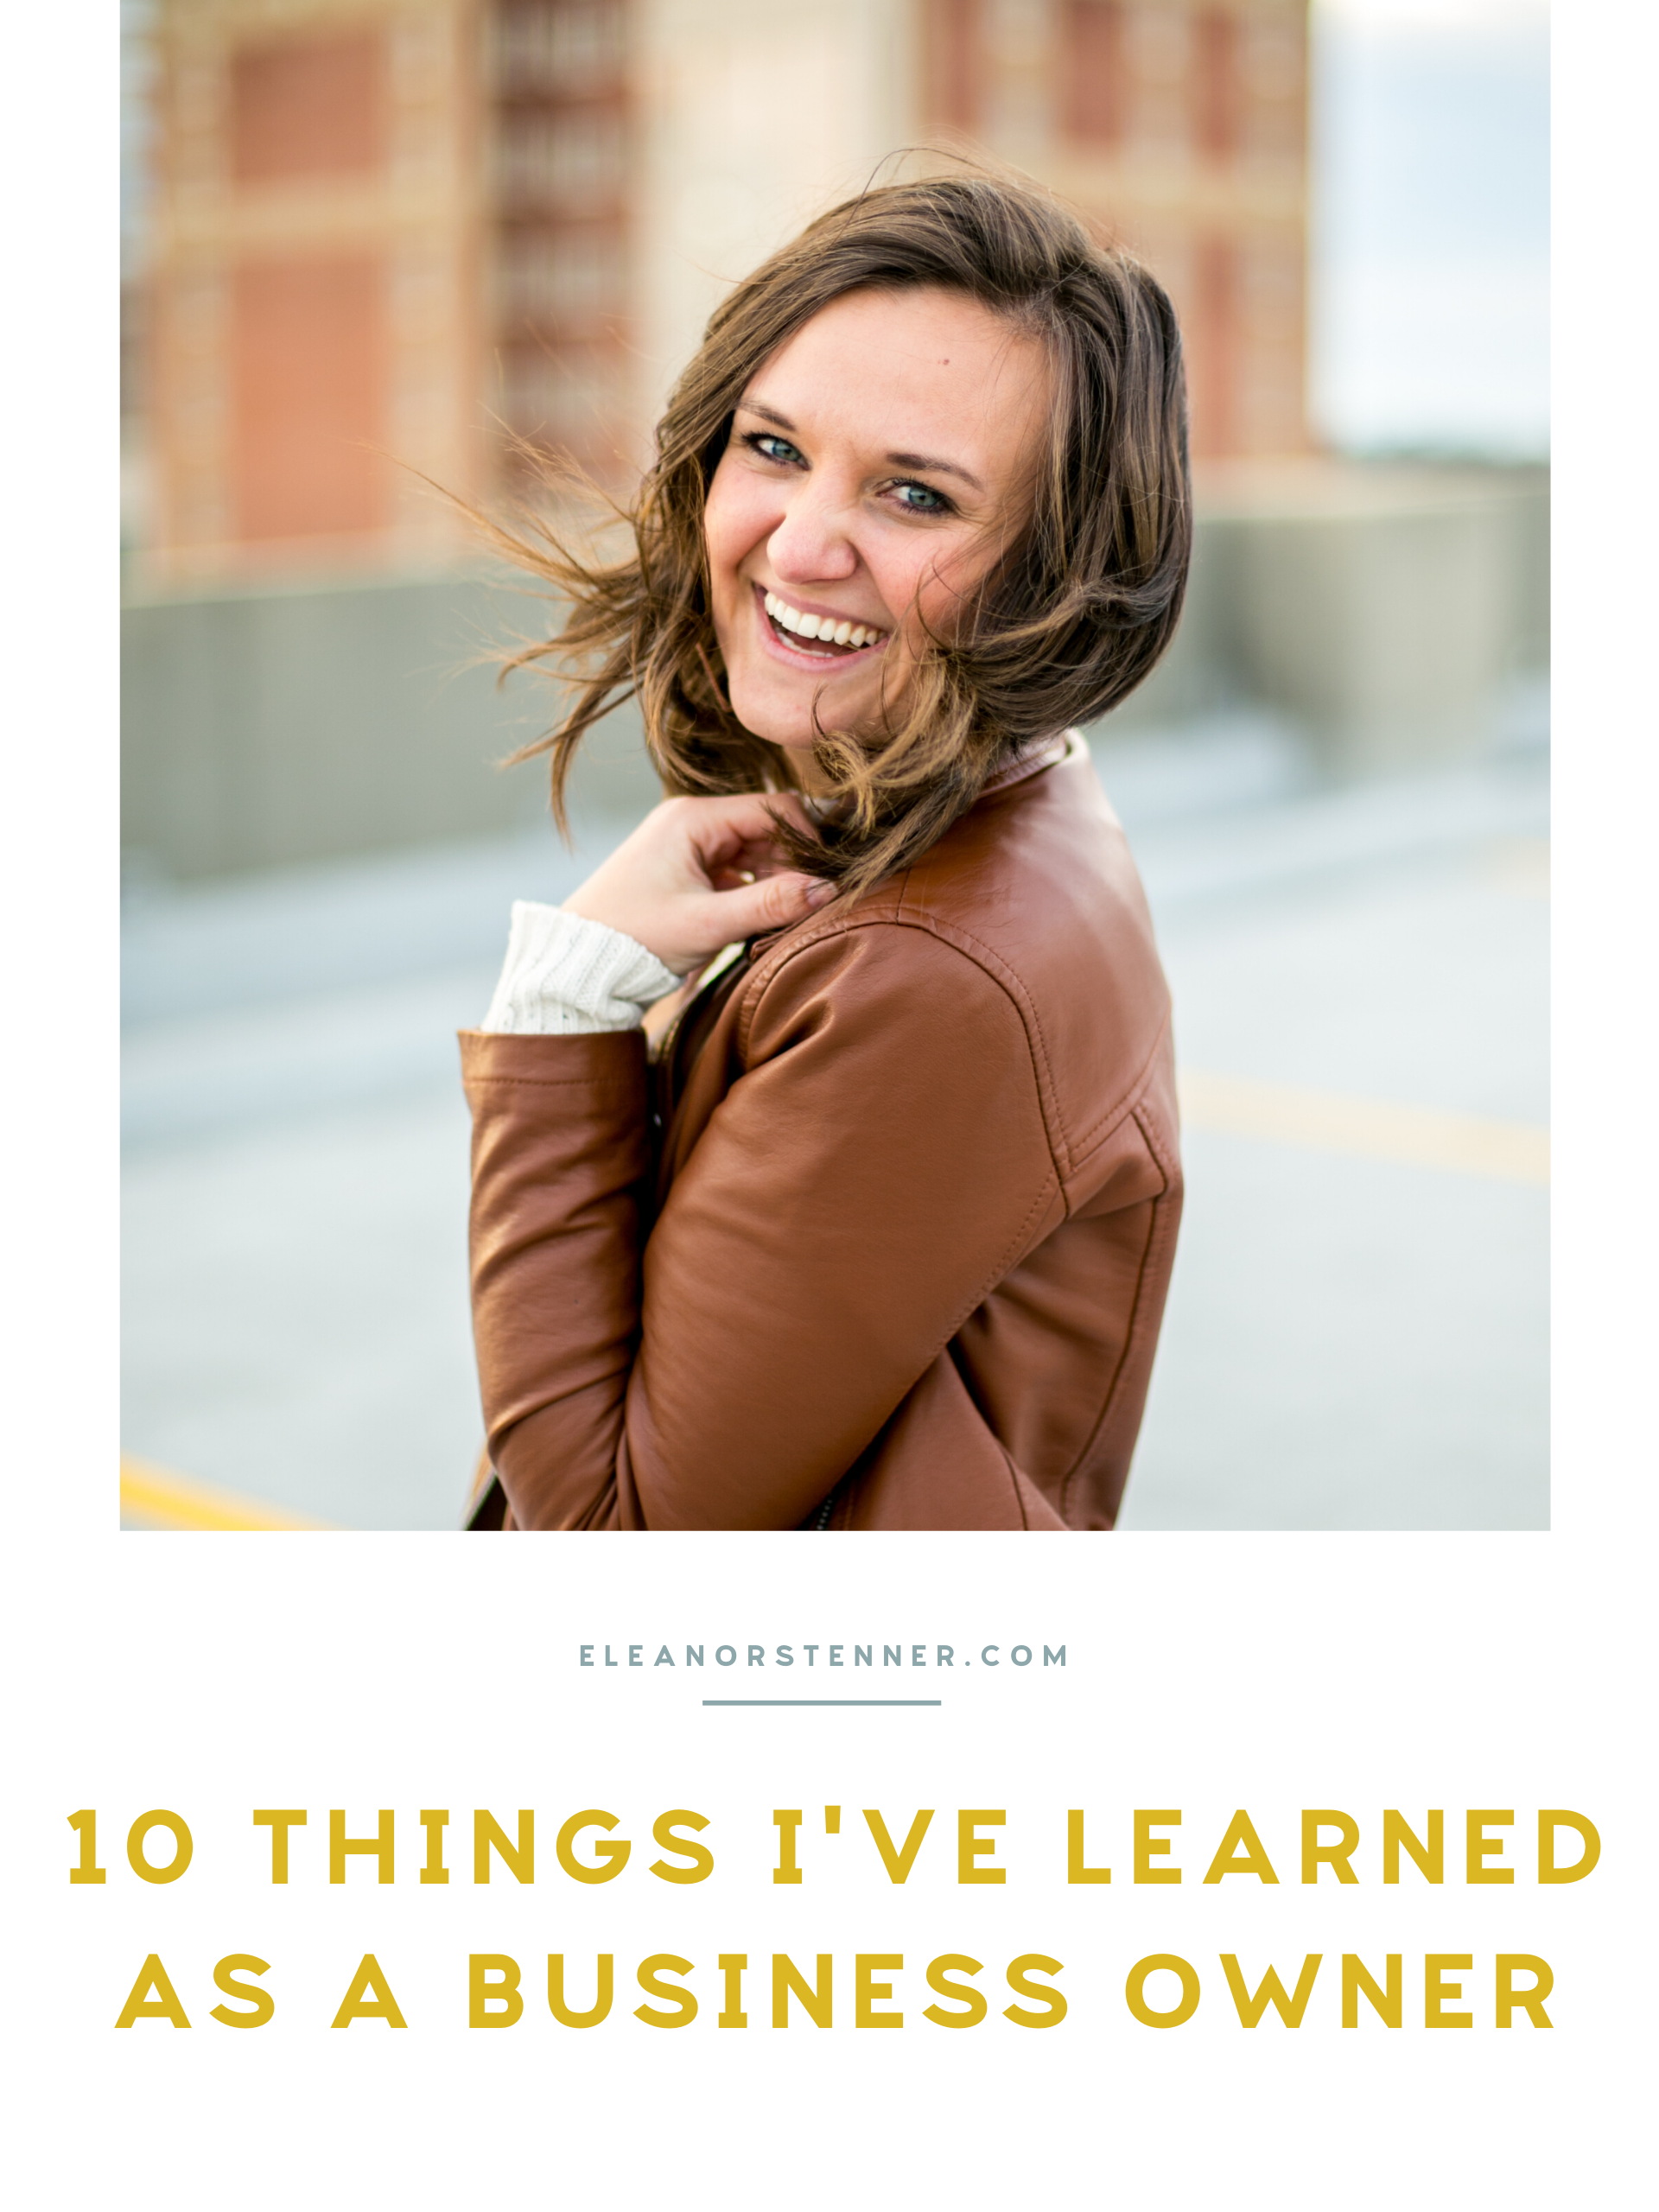 Two years ago, I stepped out in faith to be a full time photographer. I've learned, and continue to learn, what motivates me. I hope these 10 tips help!